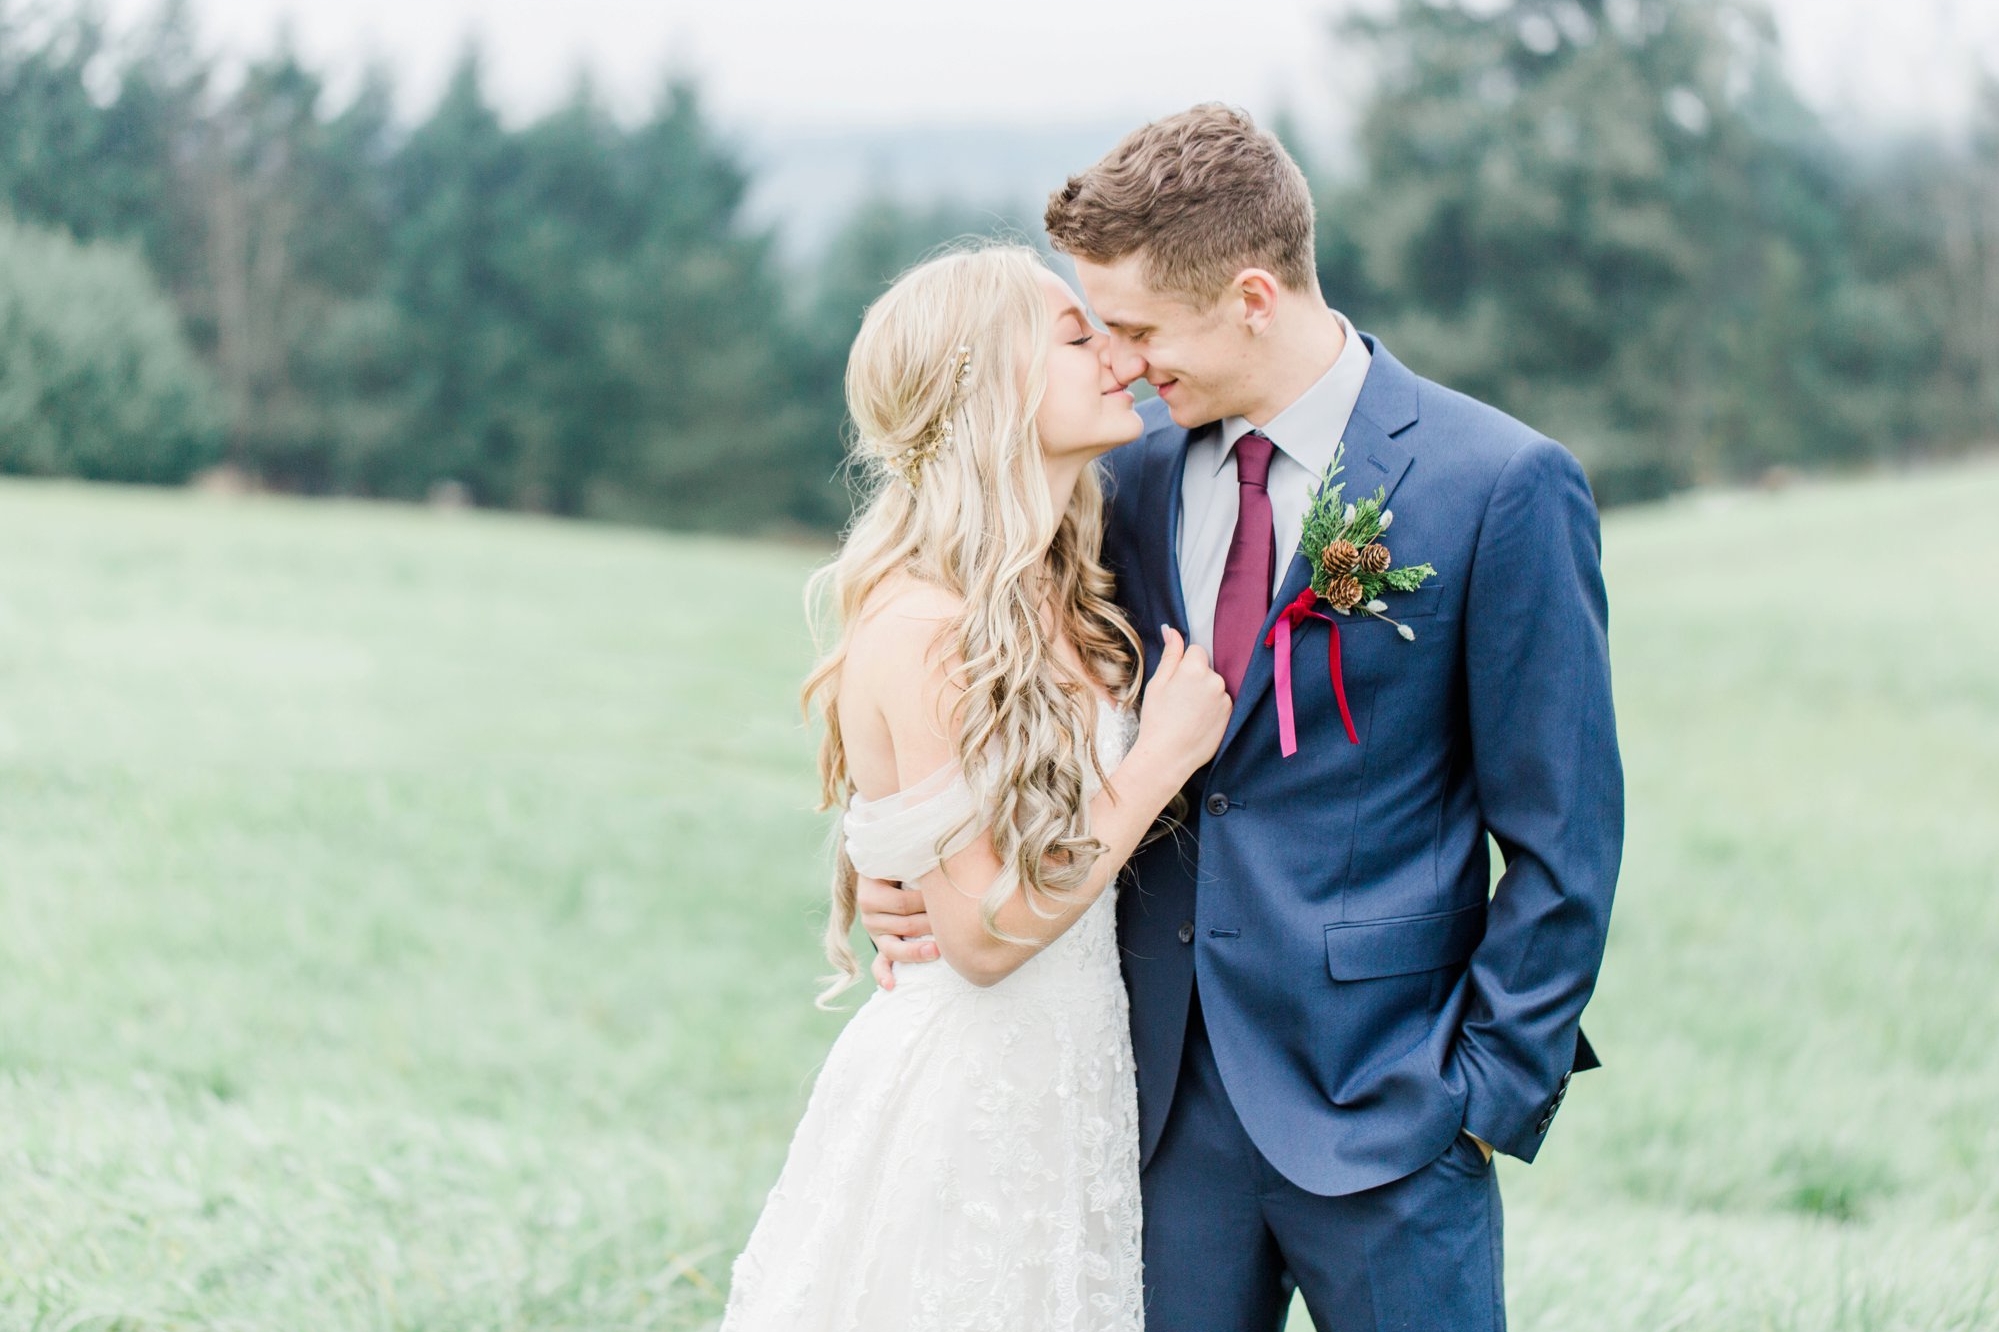 An Enchanted Forest Wedding in Vancouver Washington | Isaac & Ellie